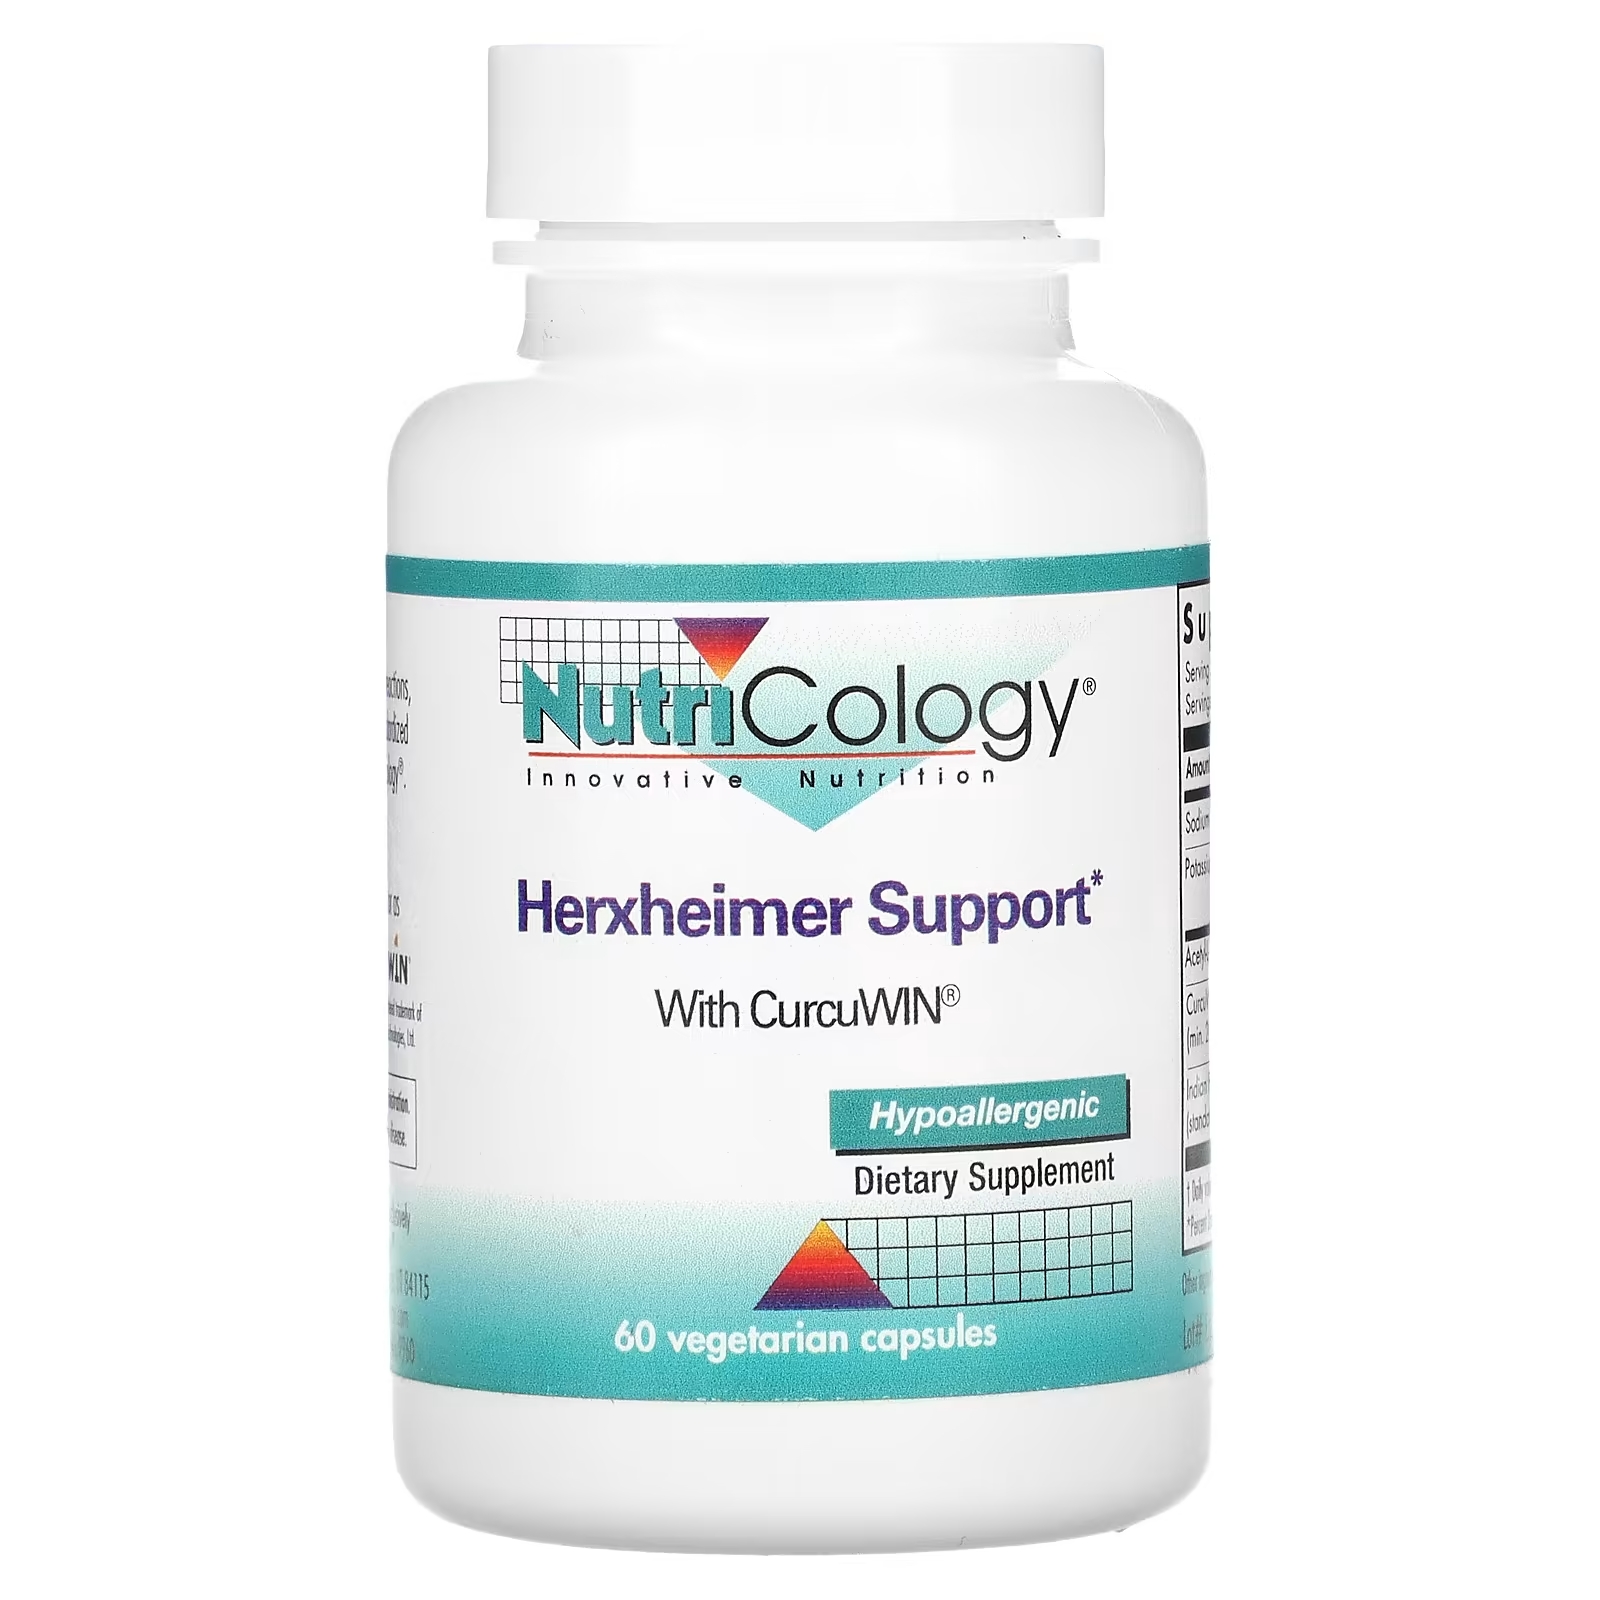 Nutricology Herxheimer Support, 60 вегетарианских капсул allergy research group herxheimer support 60 вегетарианских капсул